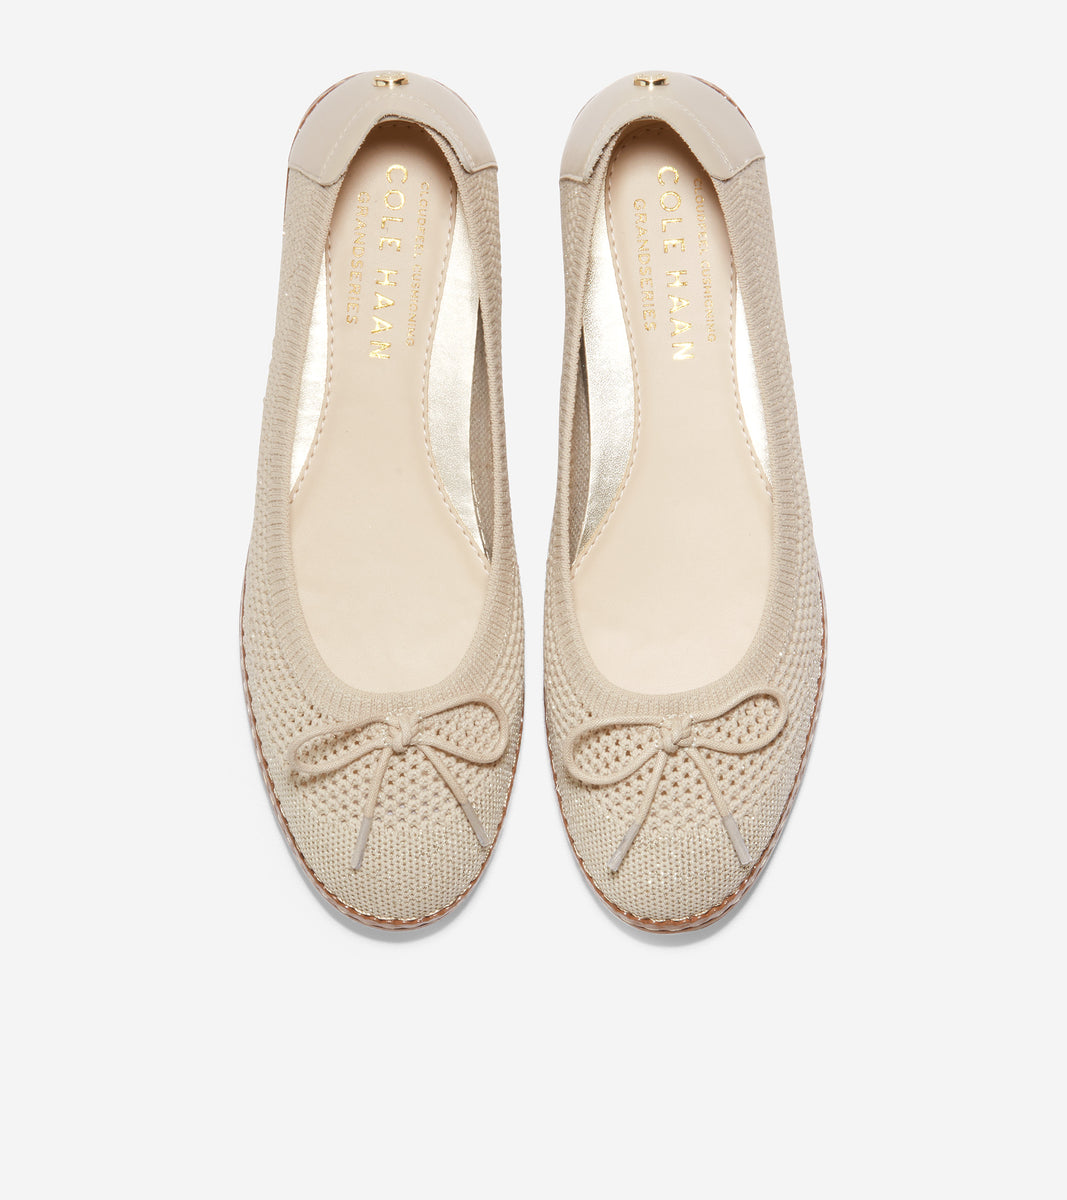 ColeHaan-Cloudfeel All-Day Ballet Flat-w21979-Cement Knit-Gold